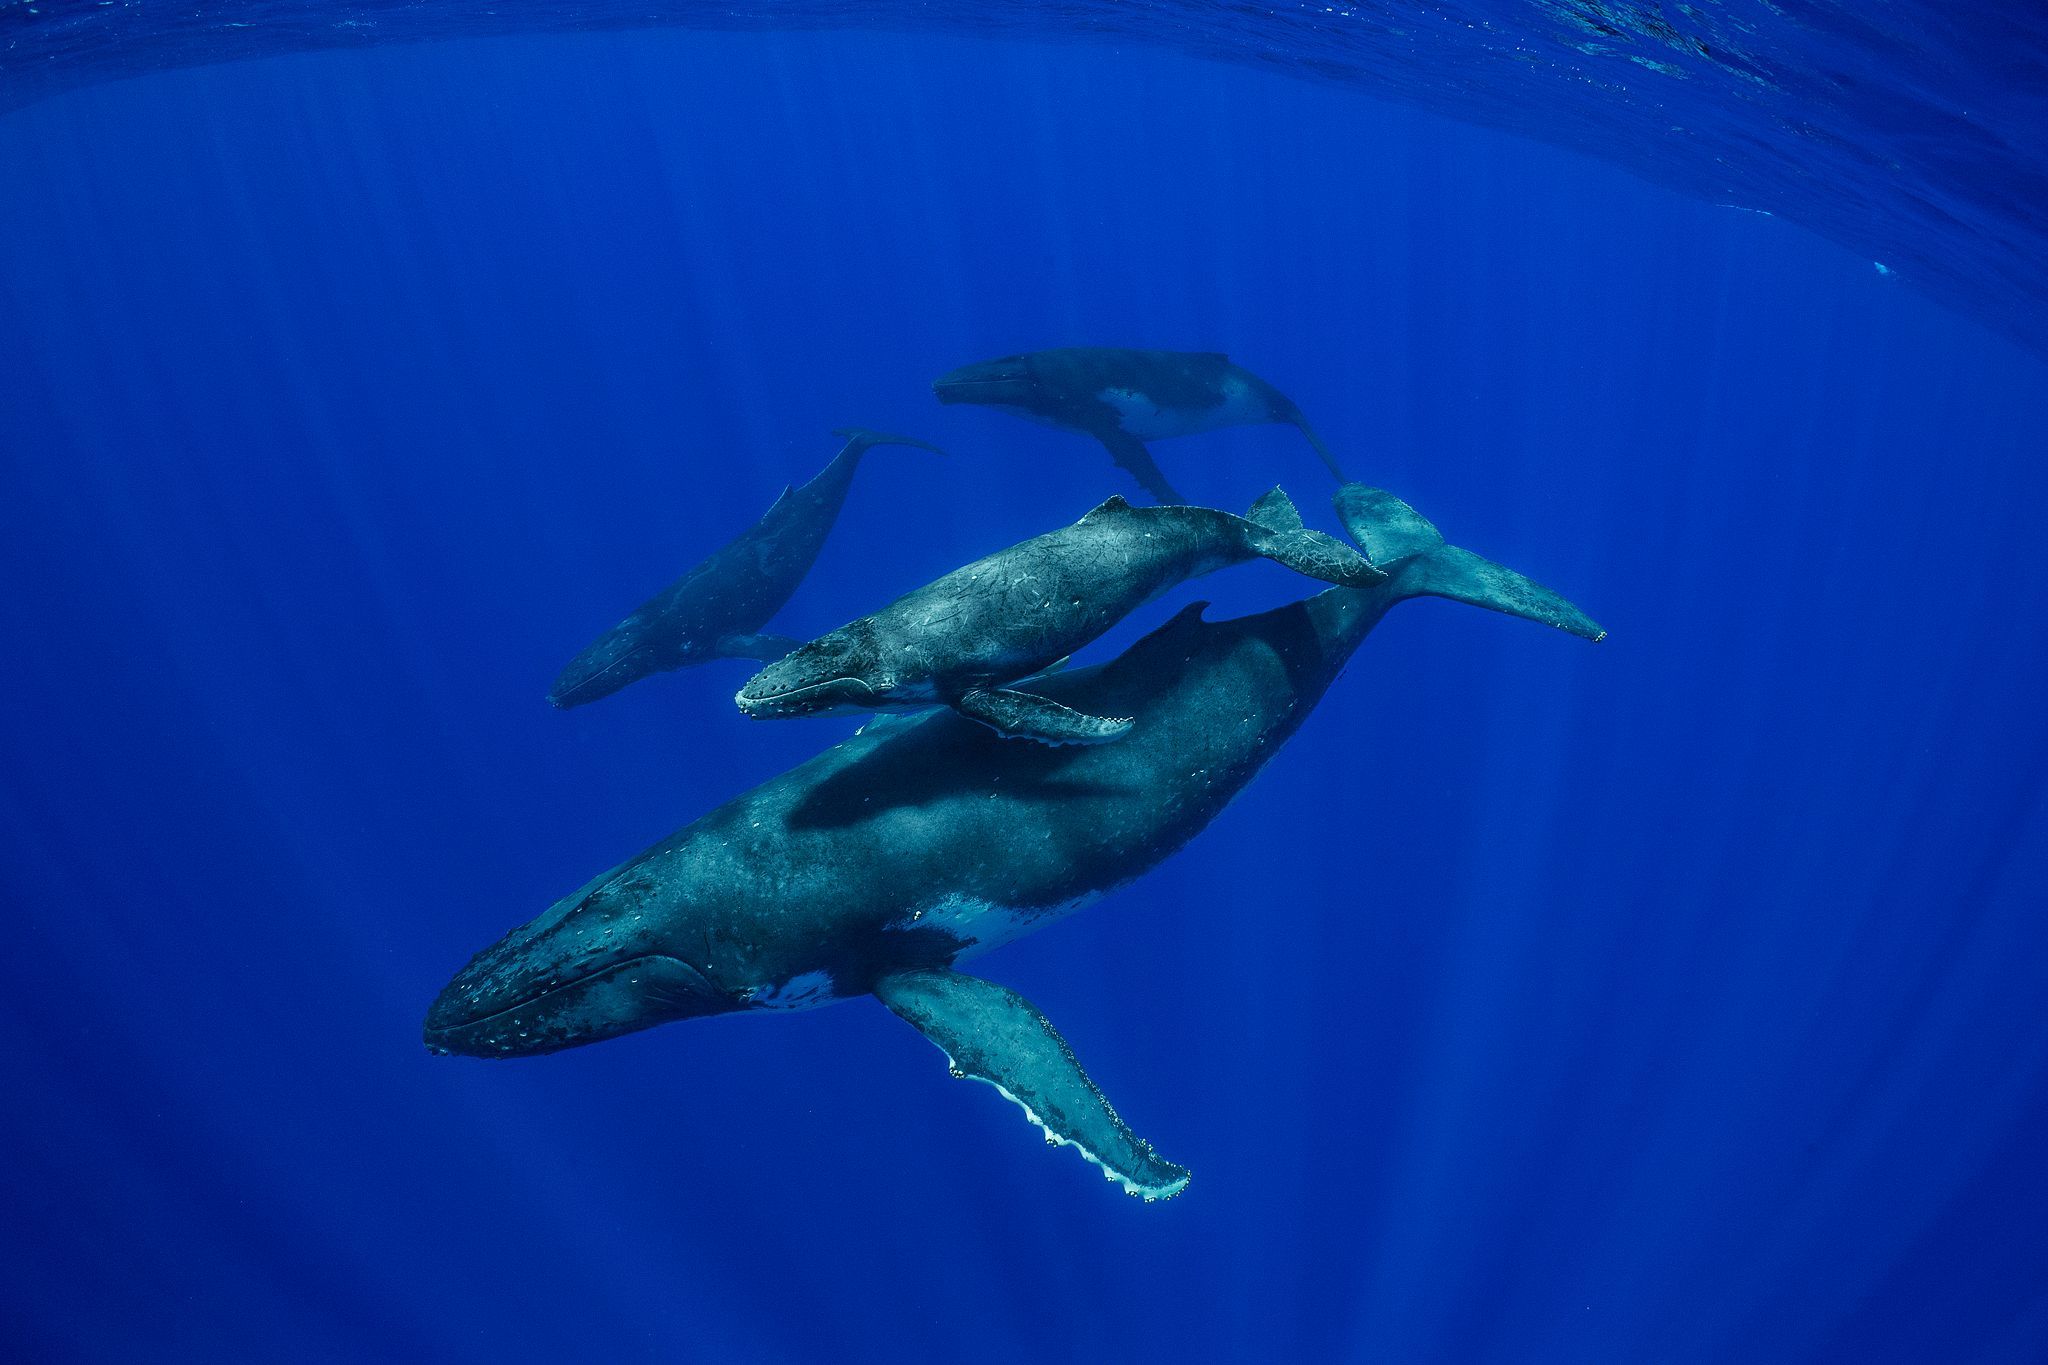 Four Humpback Whales Swimming in the Ocean Together